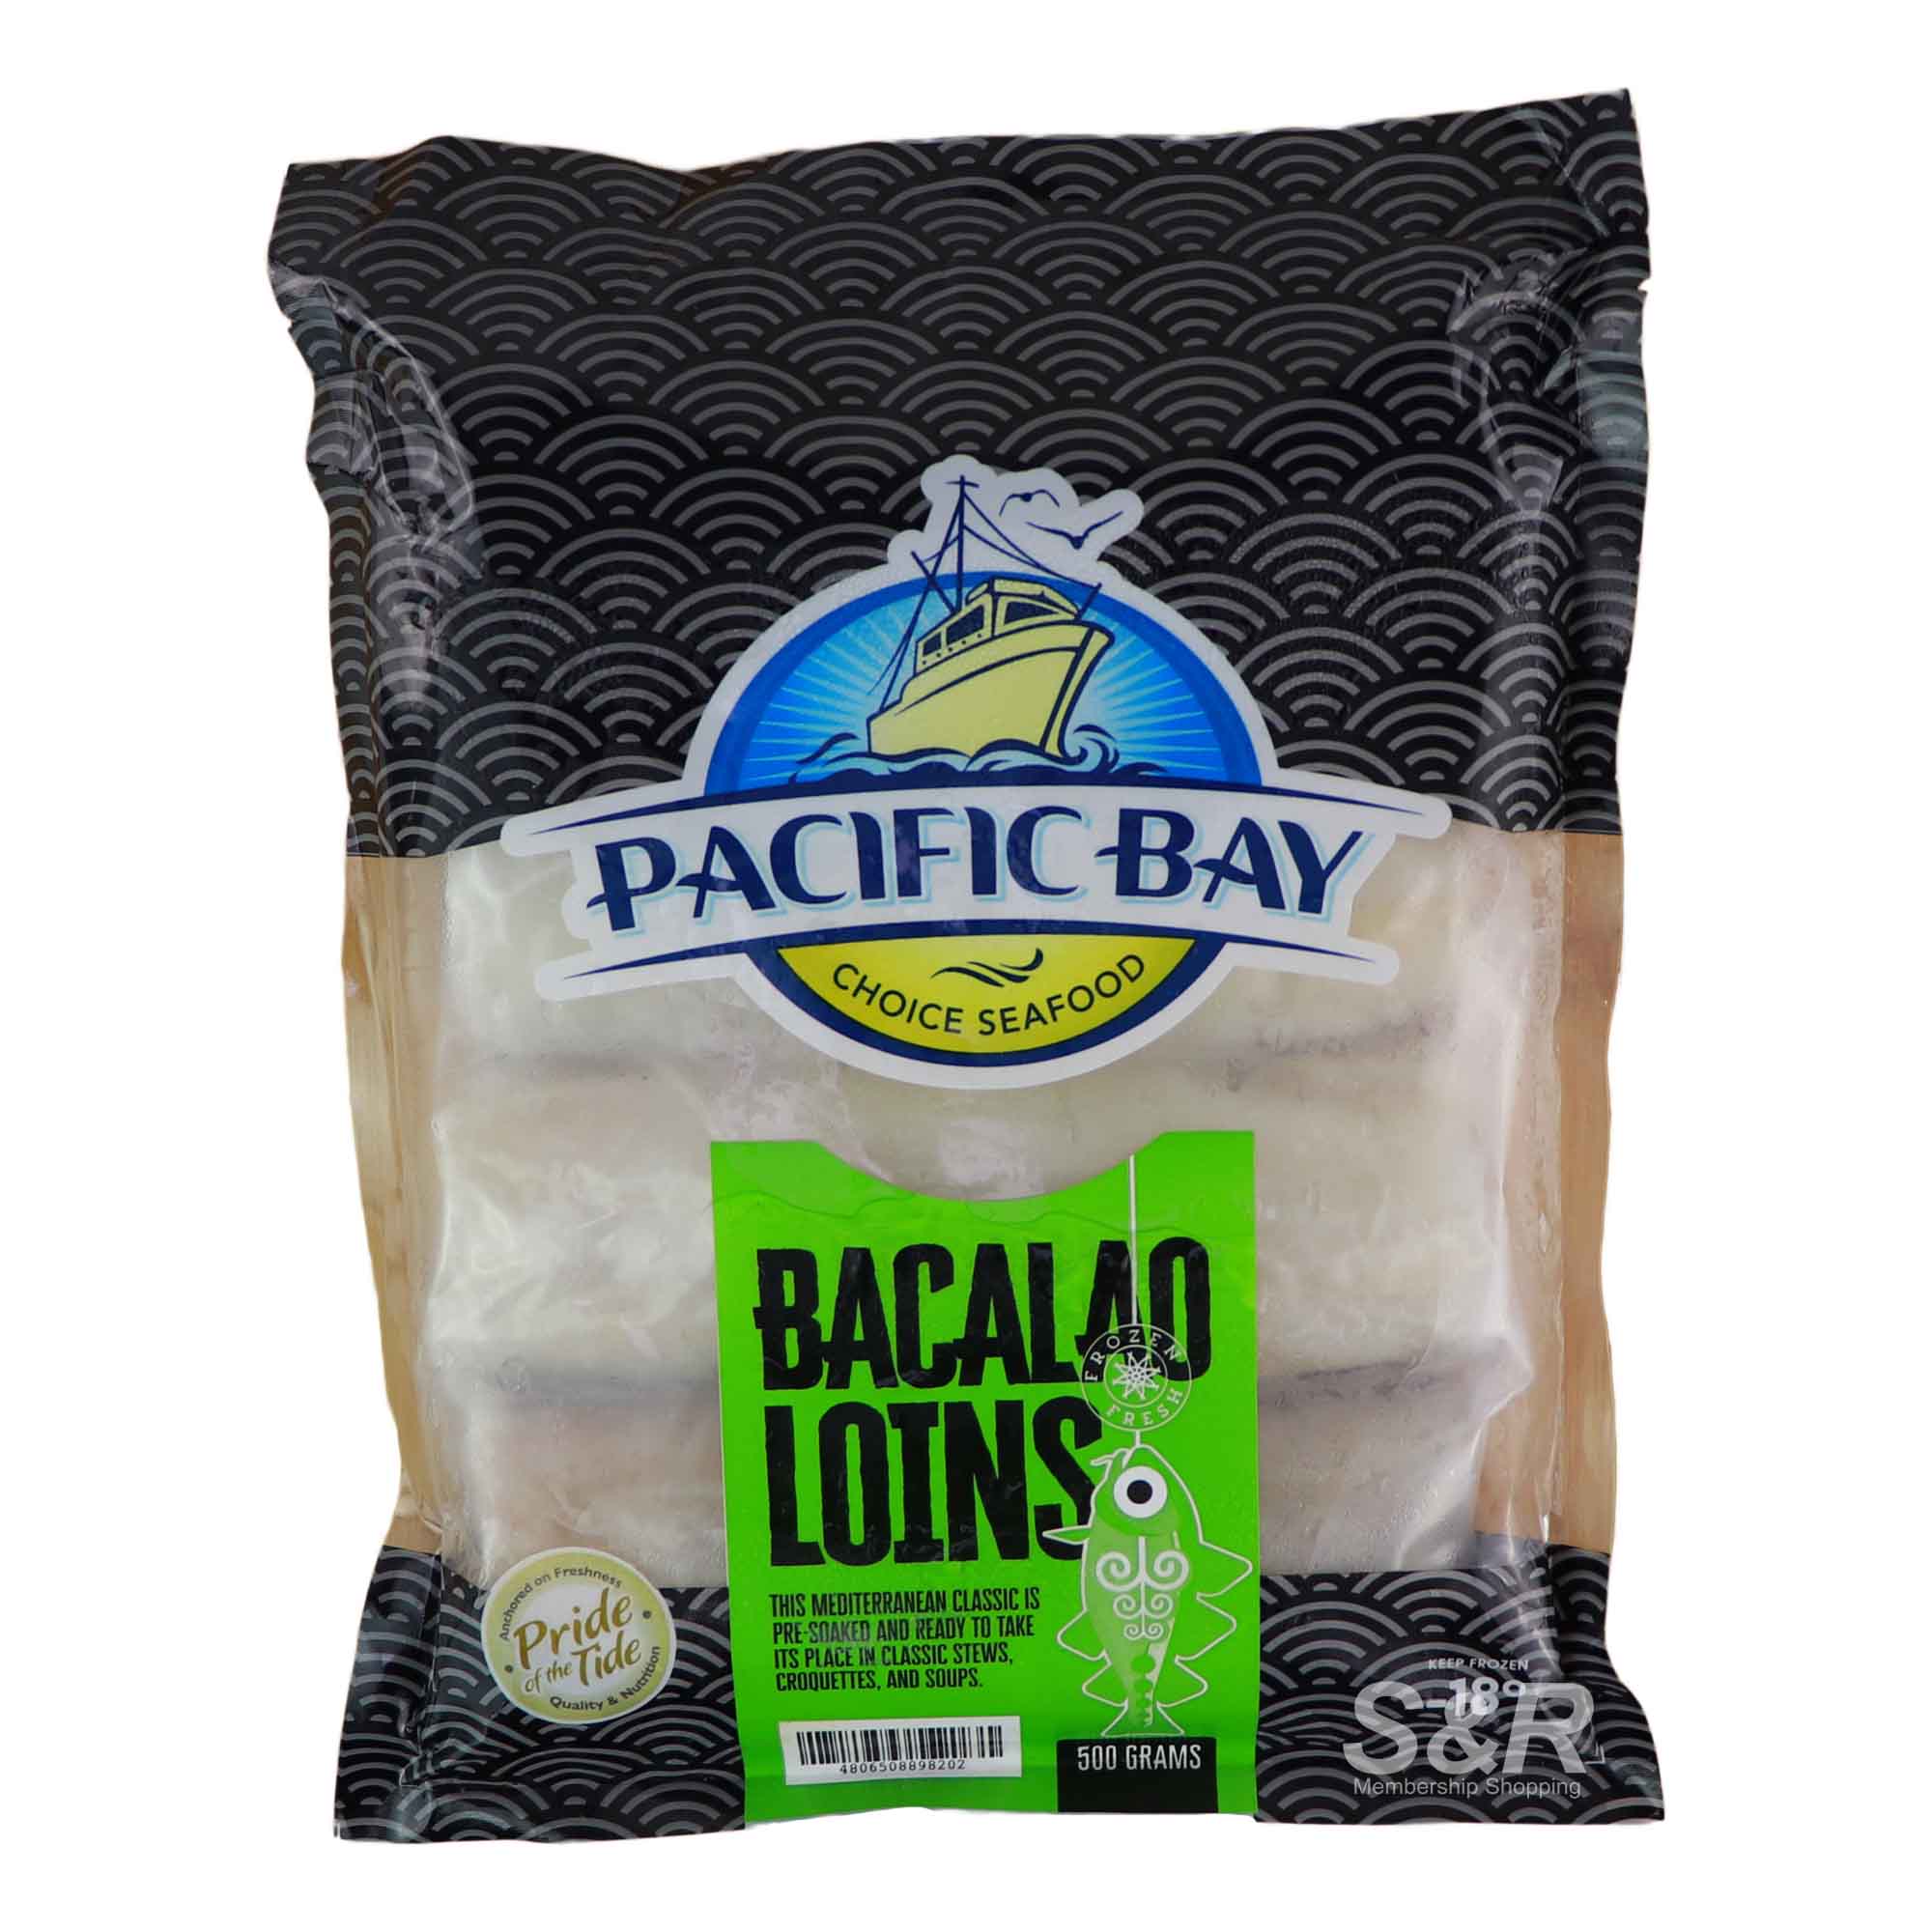 Pacific Bay Bacalao Lions 500g